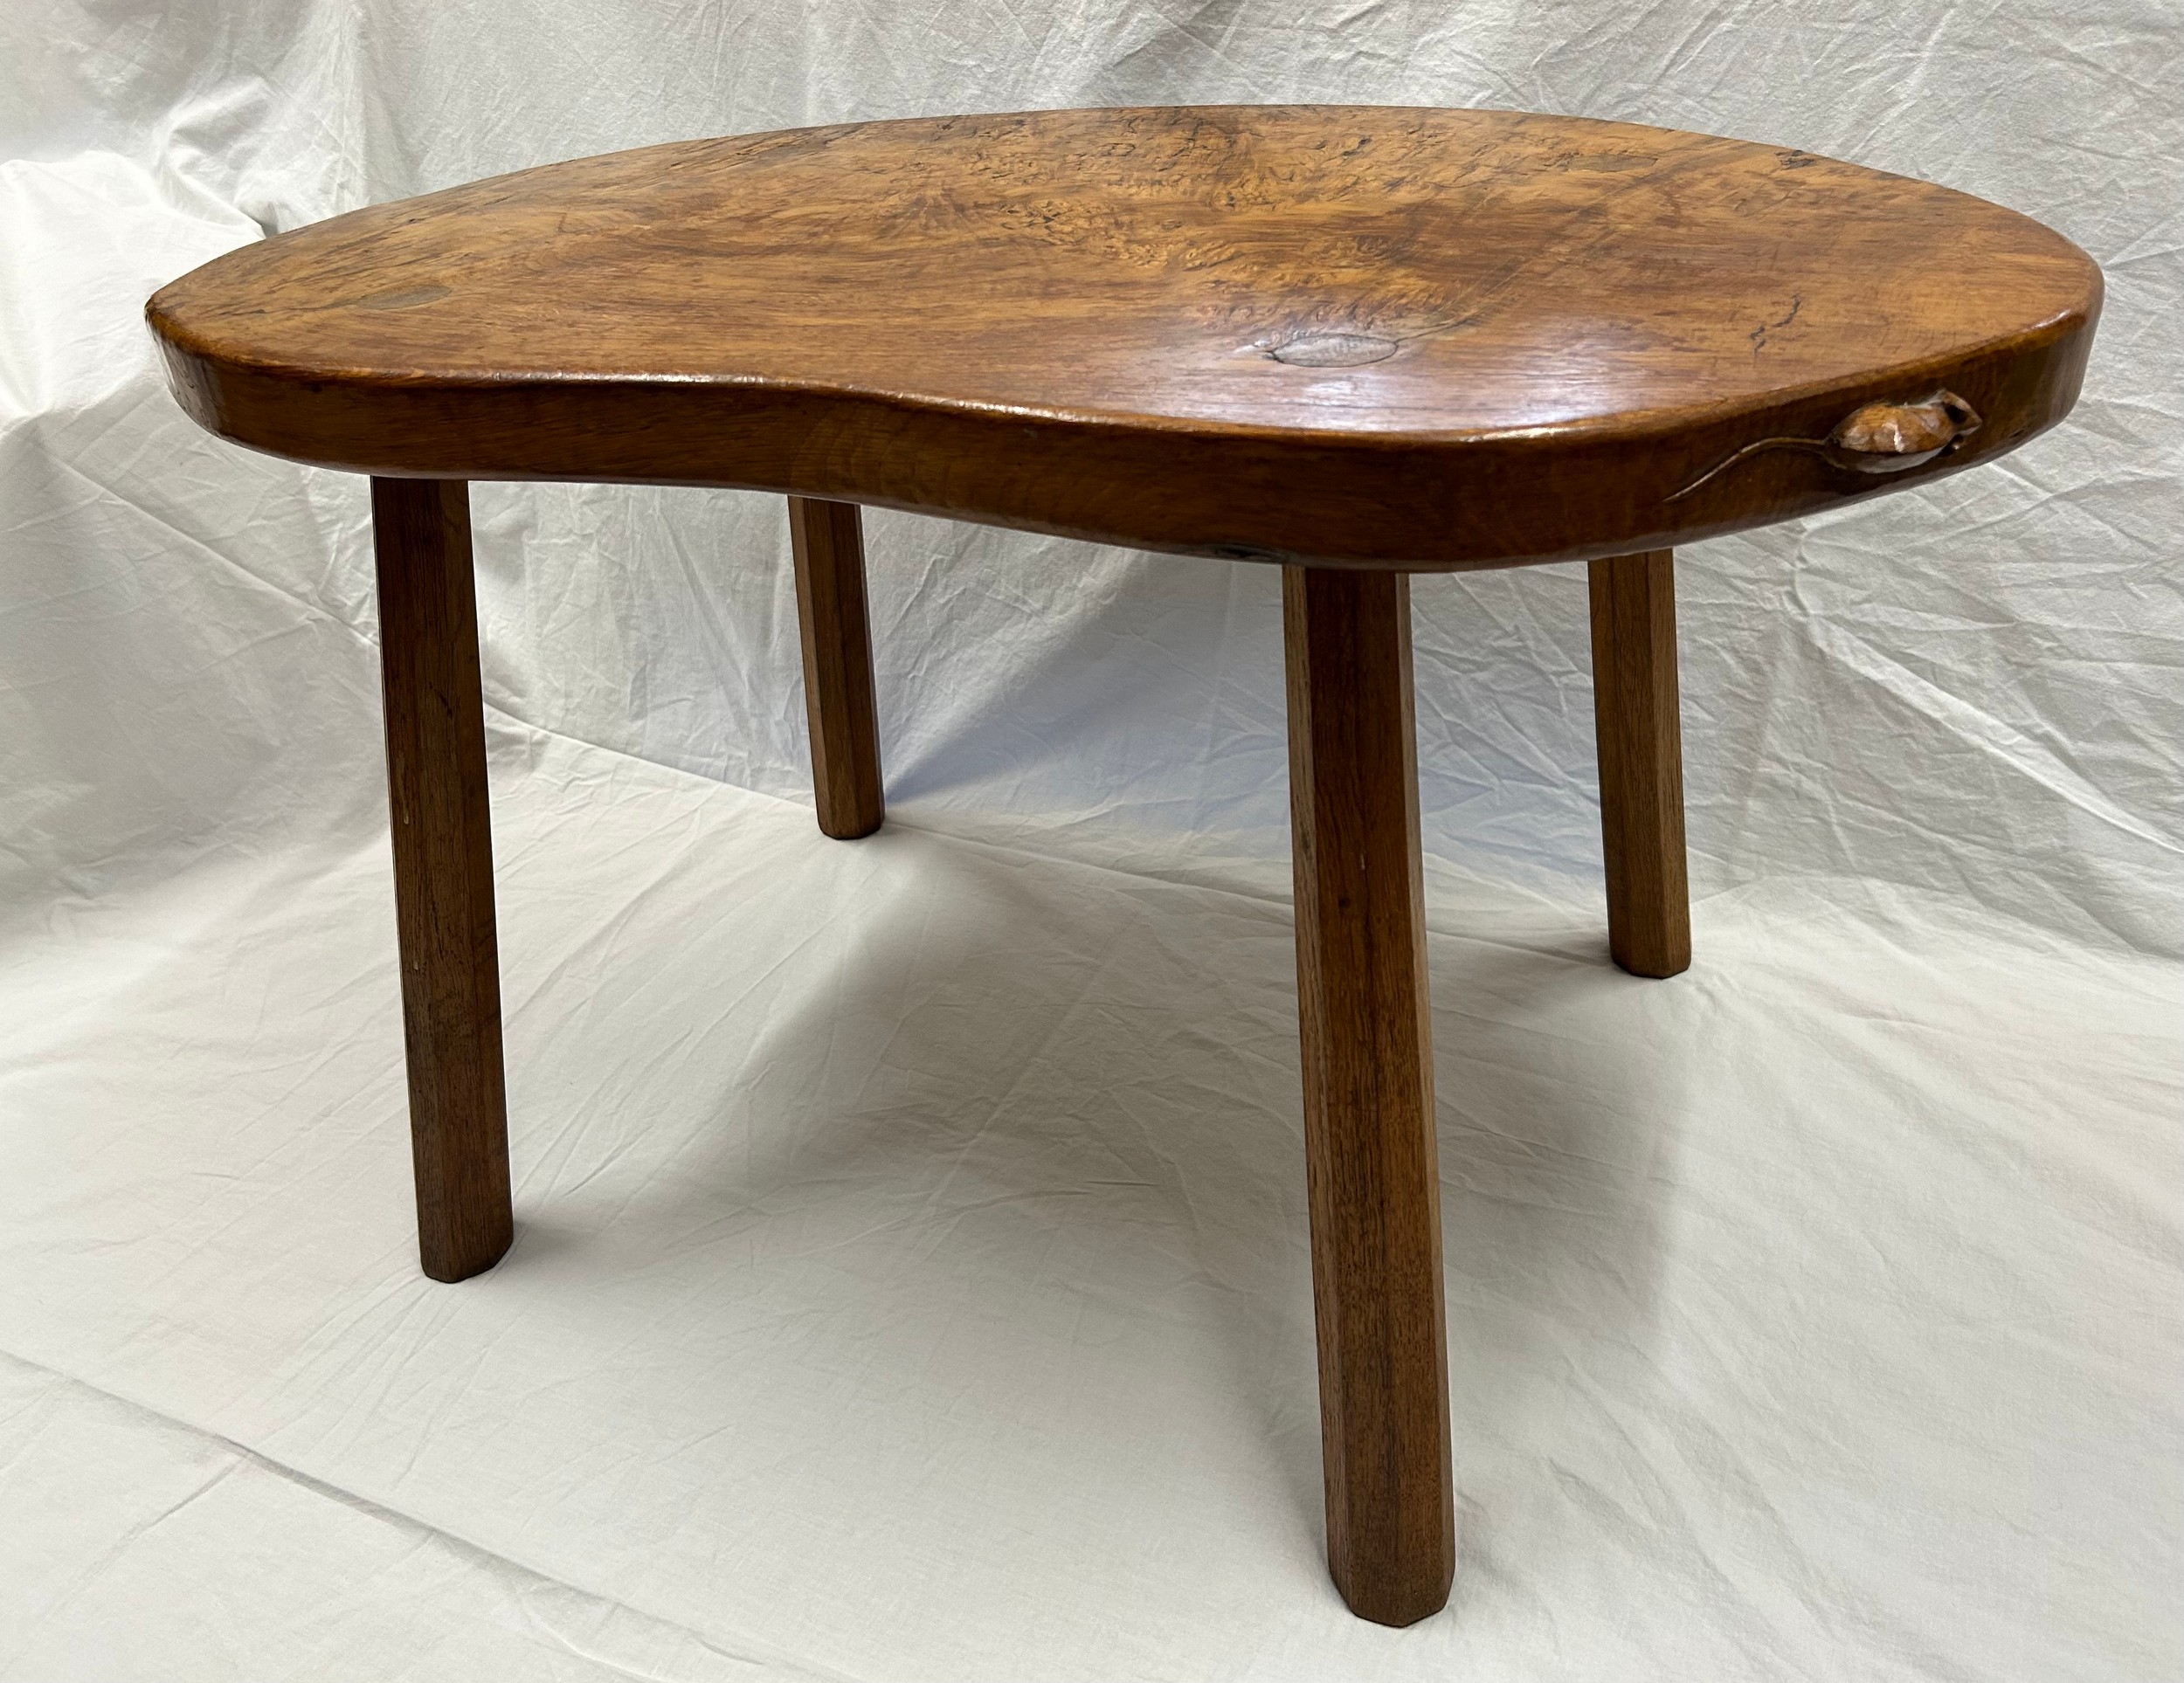 A Robert Thompson, ‘Mouseman’ kidney shaped burr oak table on four octagonal legs with signature - Image 6 of 29